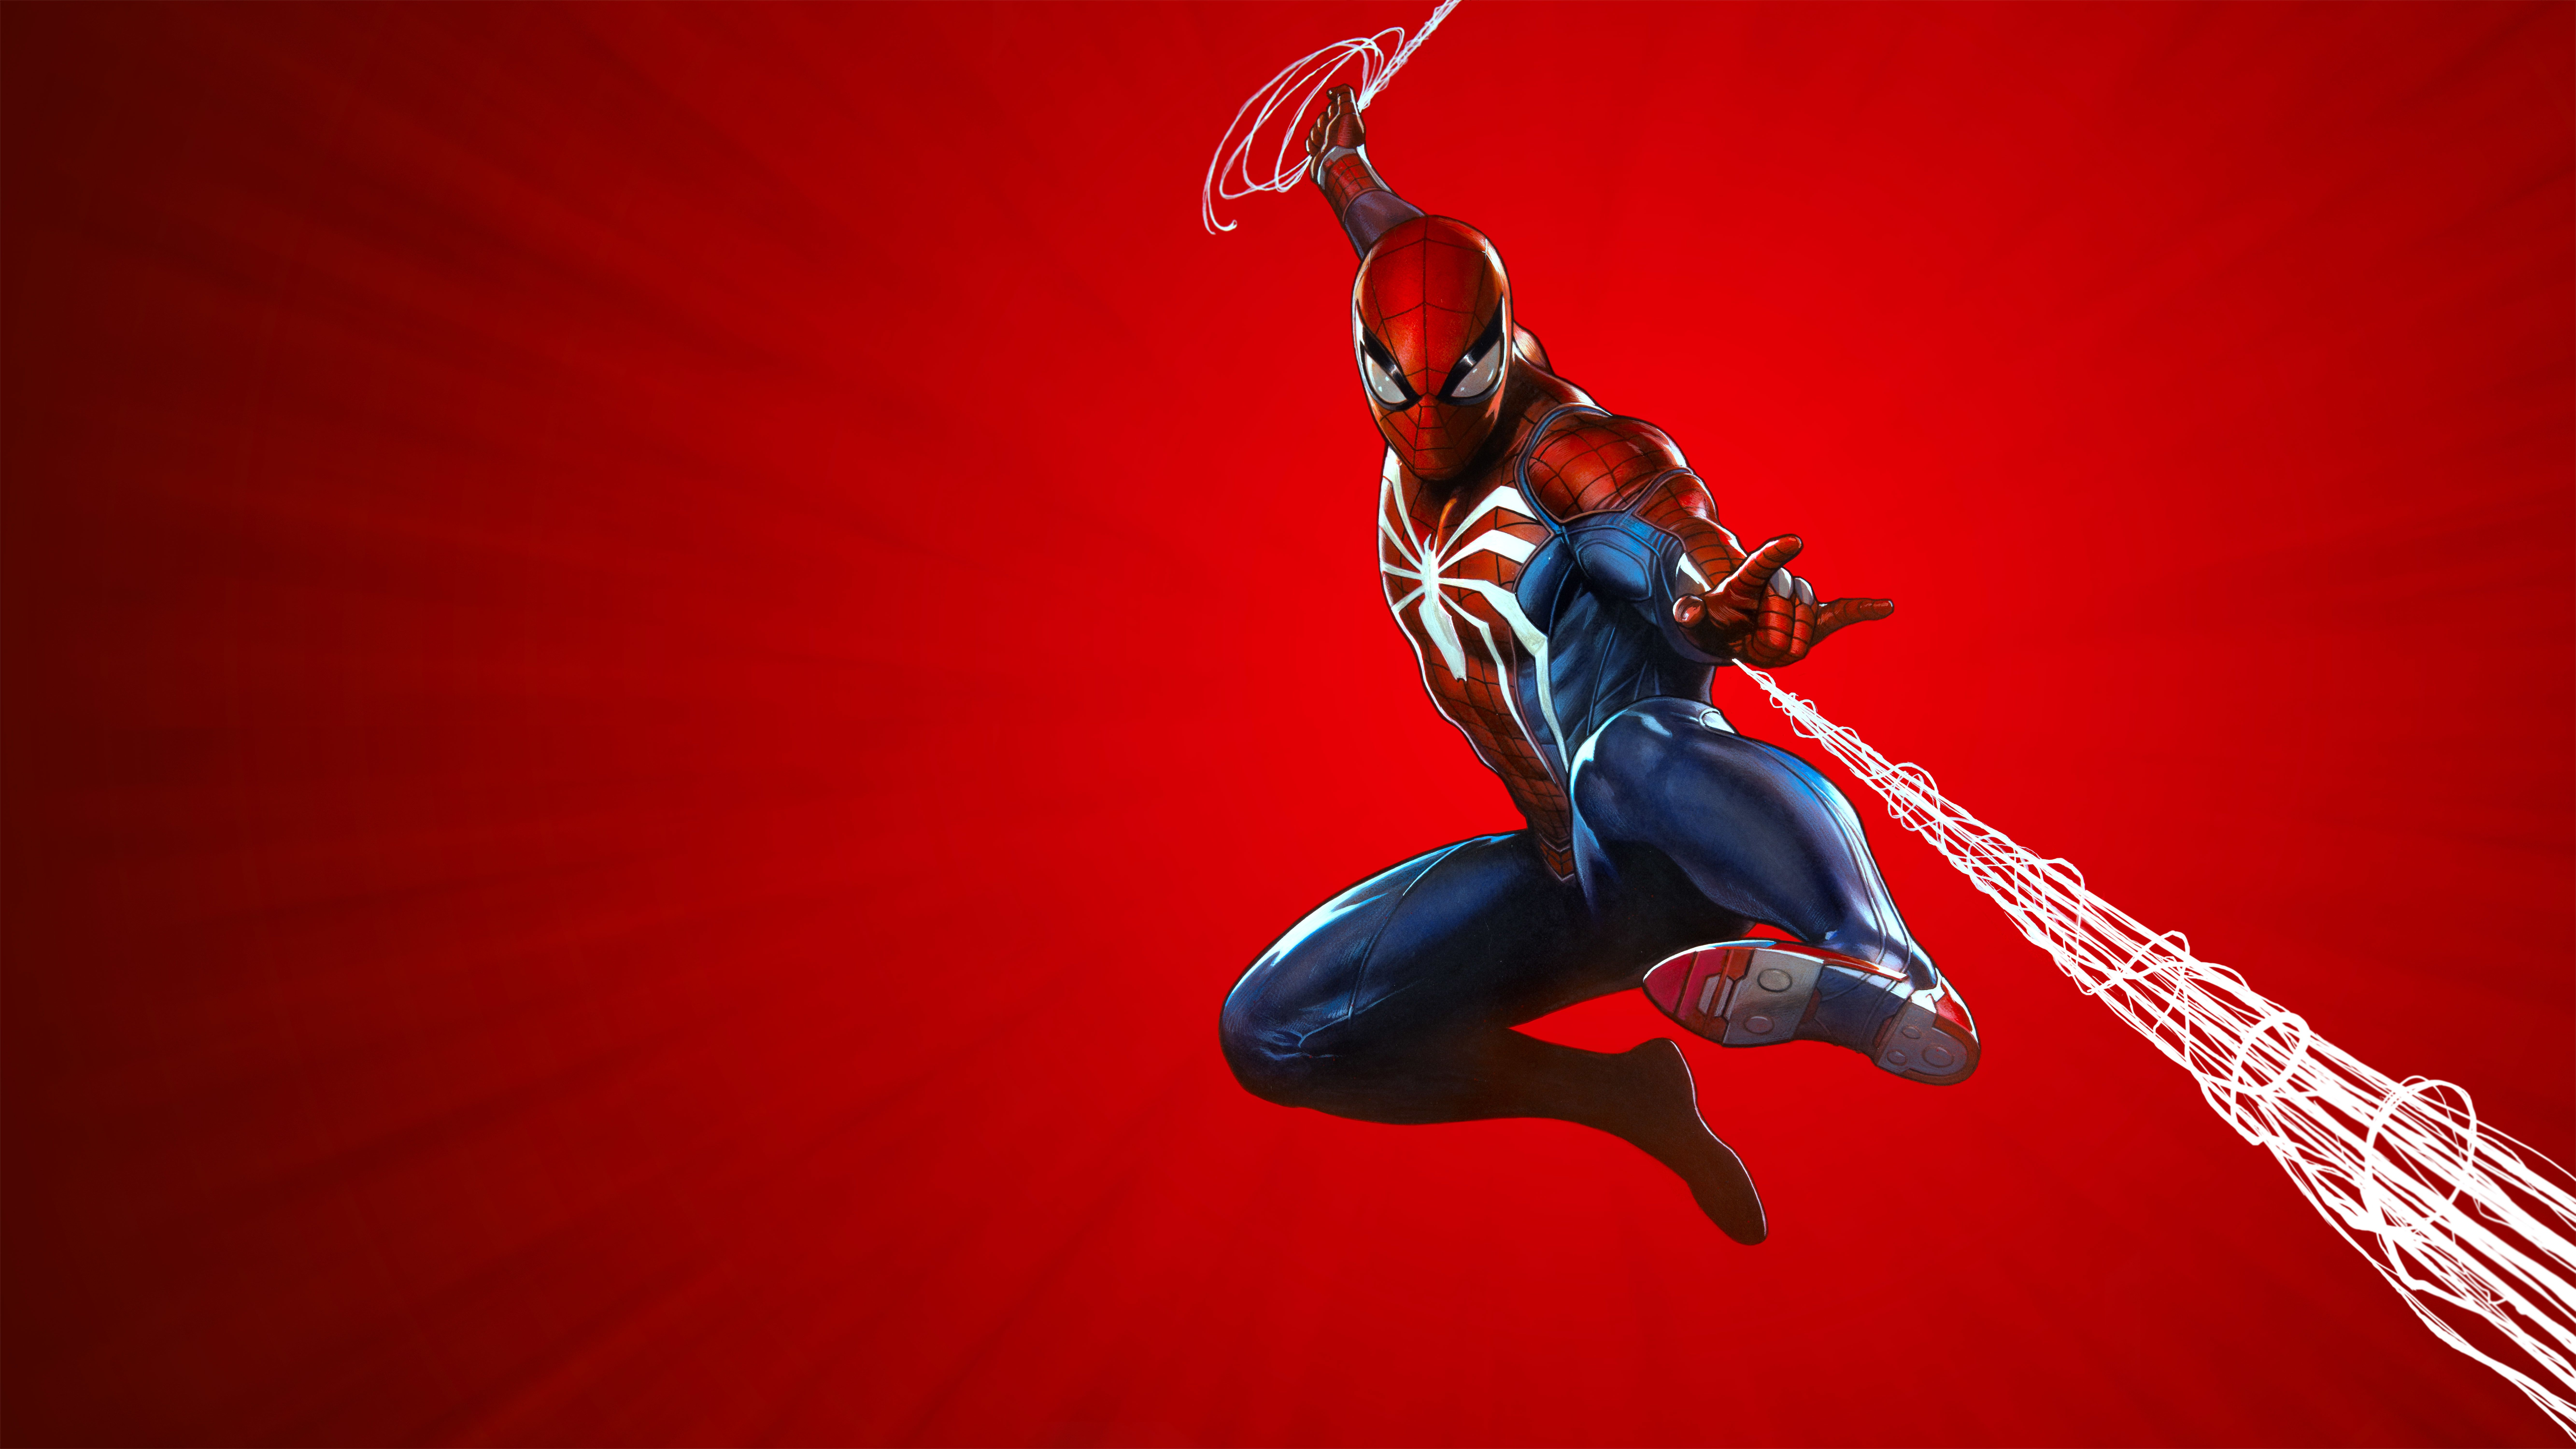 Spider Man PS4 720P Wallpaper, HD Games 4K Wallpaper, Image, Photo And Background